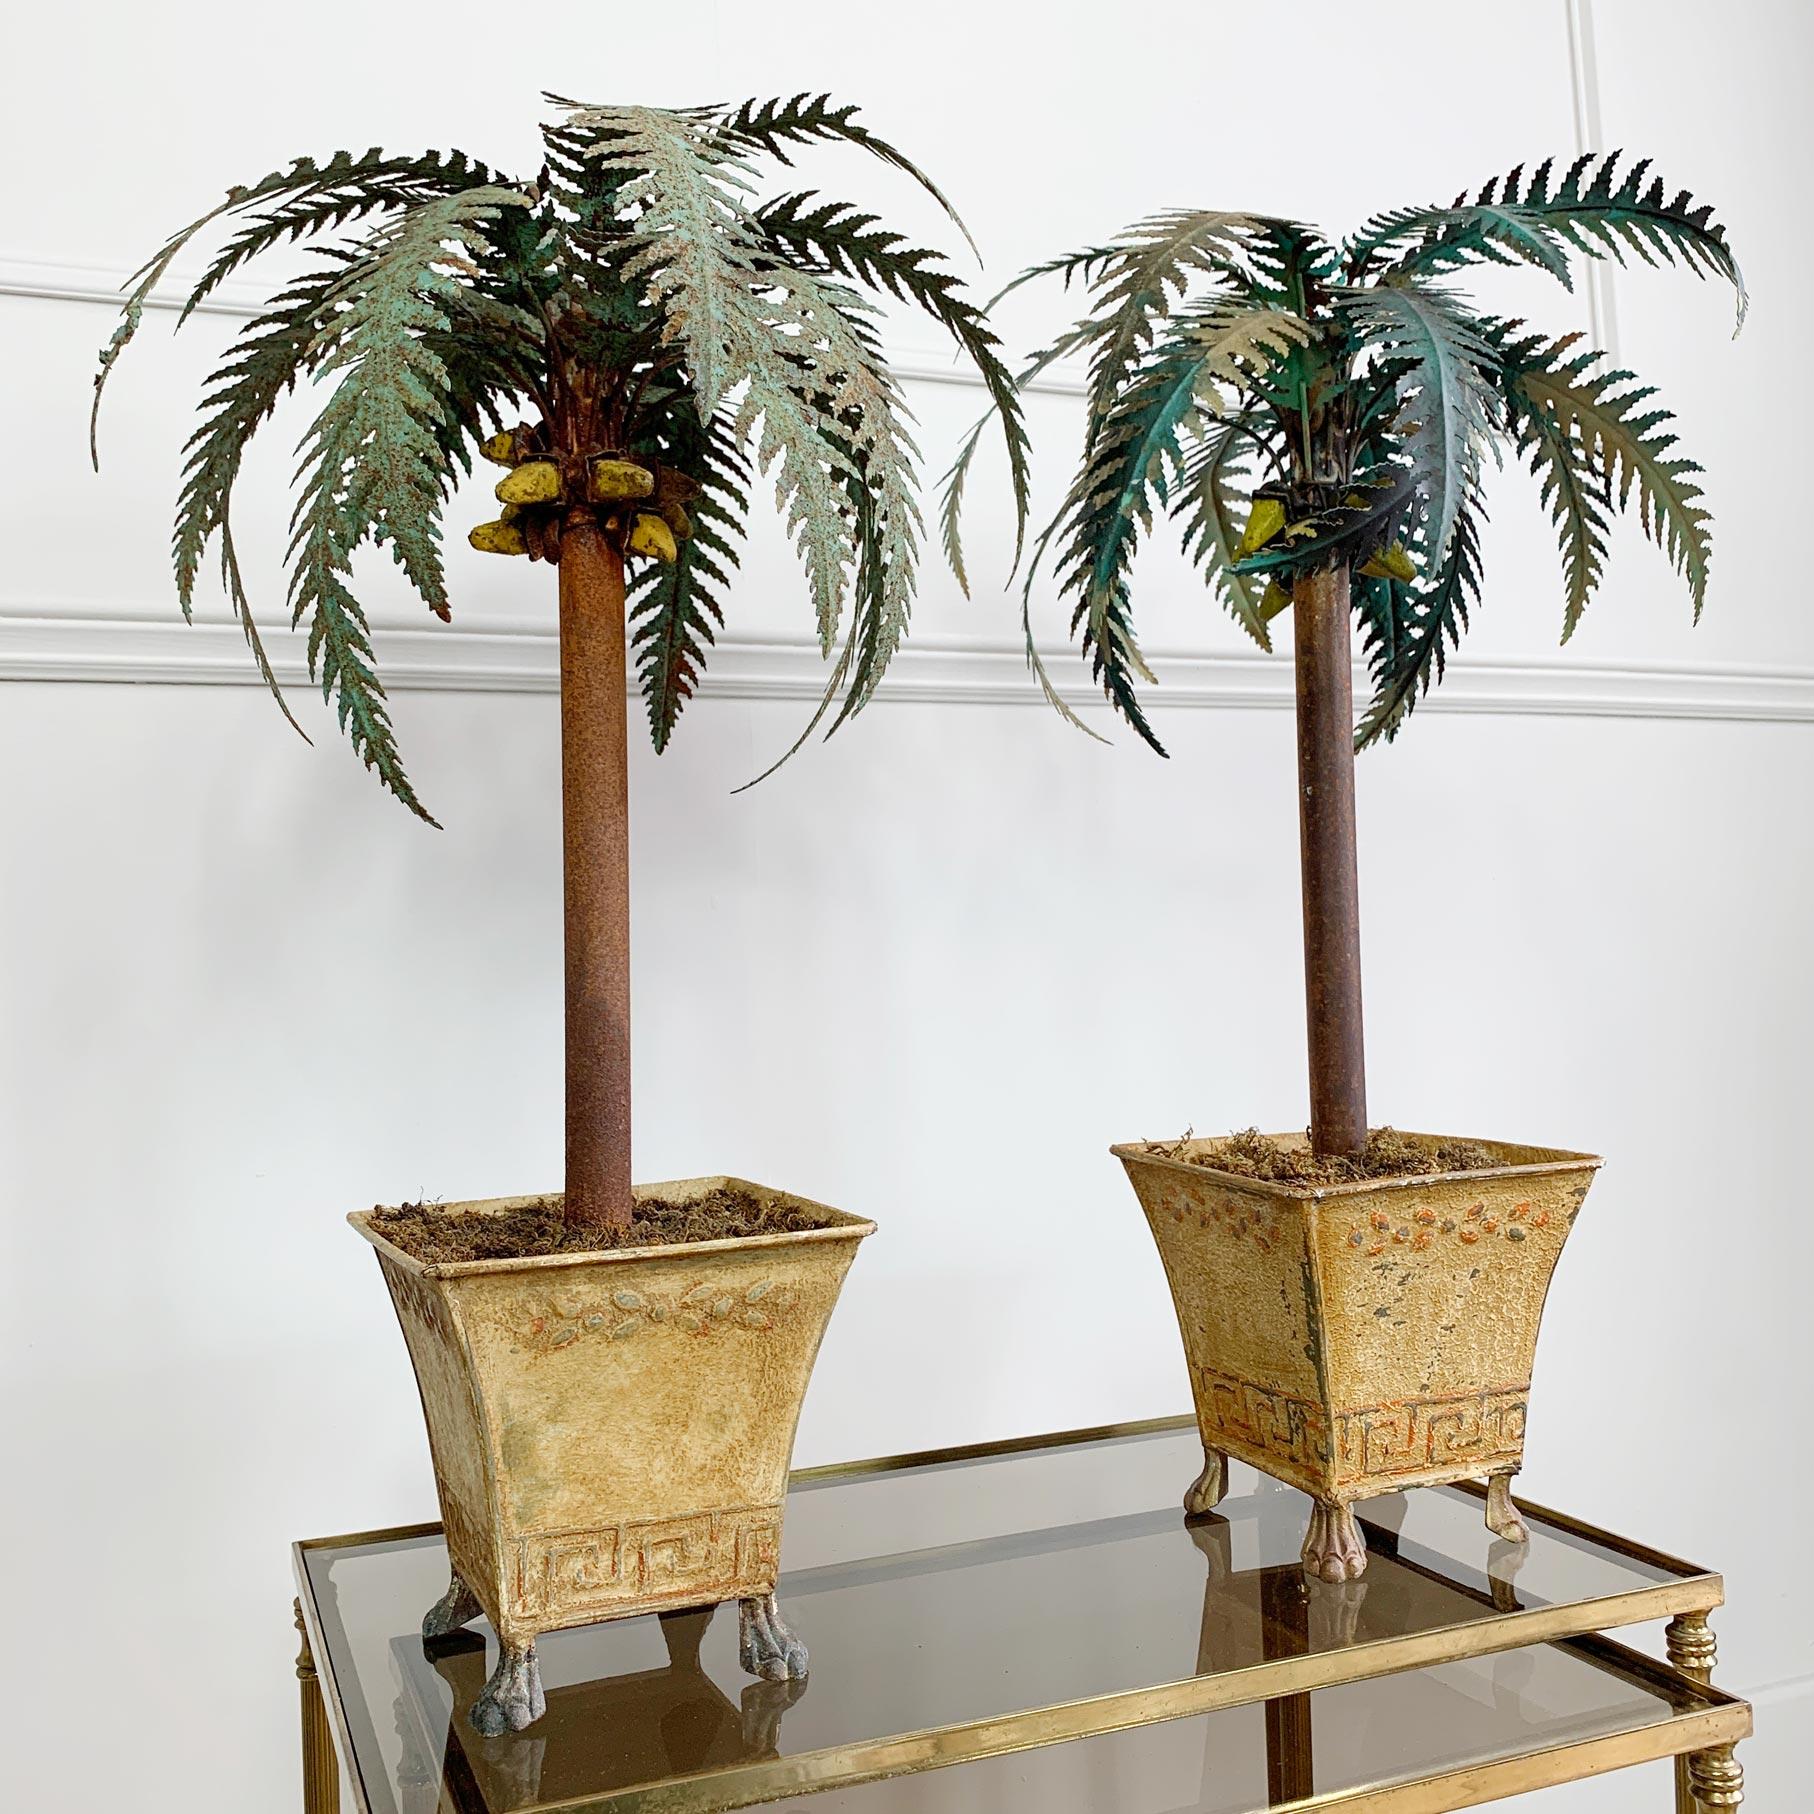 An exceptional pair of hand painted antique metal palm trees, made in Italy circa 1870, very intricate detailing and painted decoration. The pair are set within small moss topped planters that sit upon lion paw feet. The palm leaves sit above a